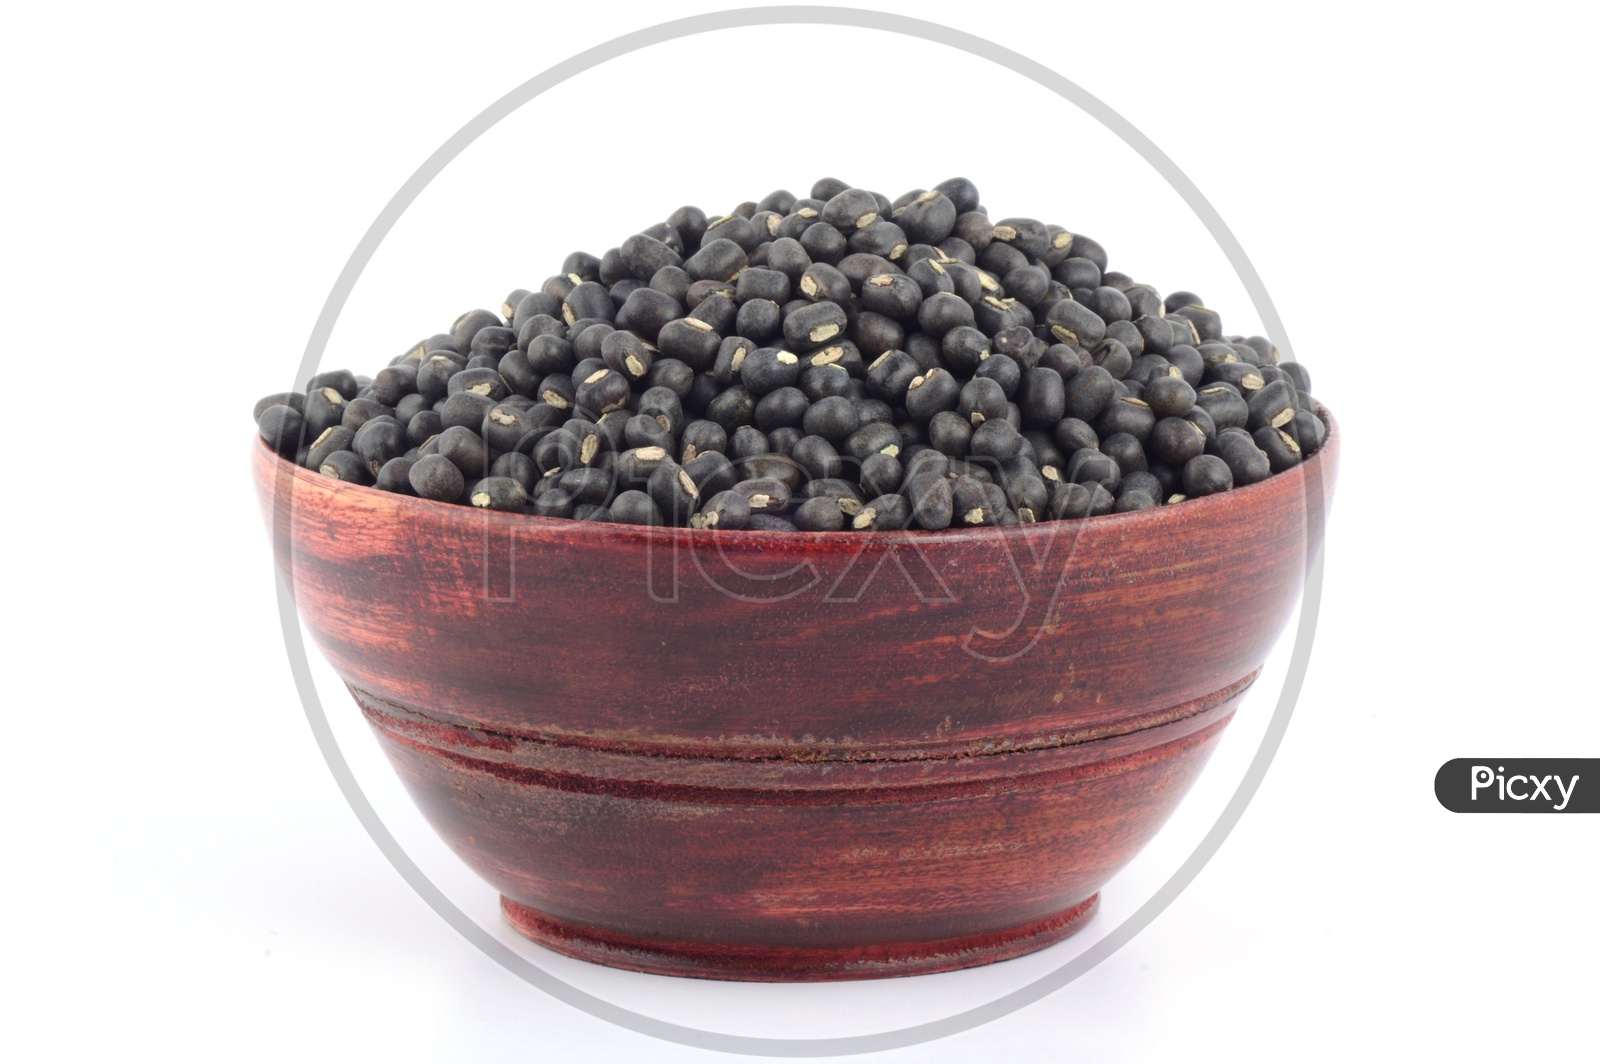 Urad dal, black gram, Vigna mungo  In wooden Bowl on  An Isolated white background